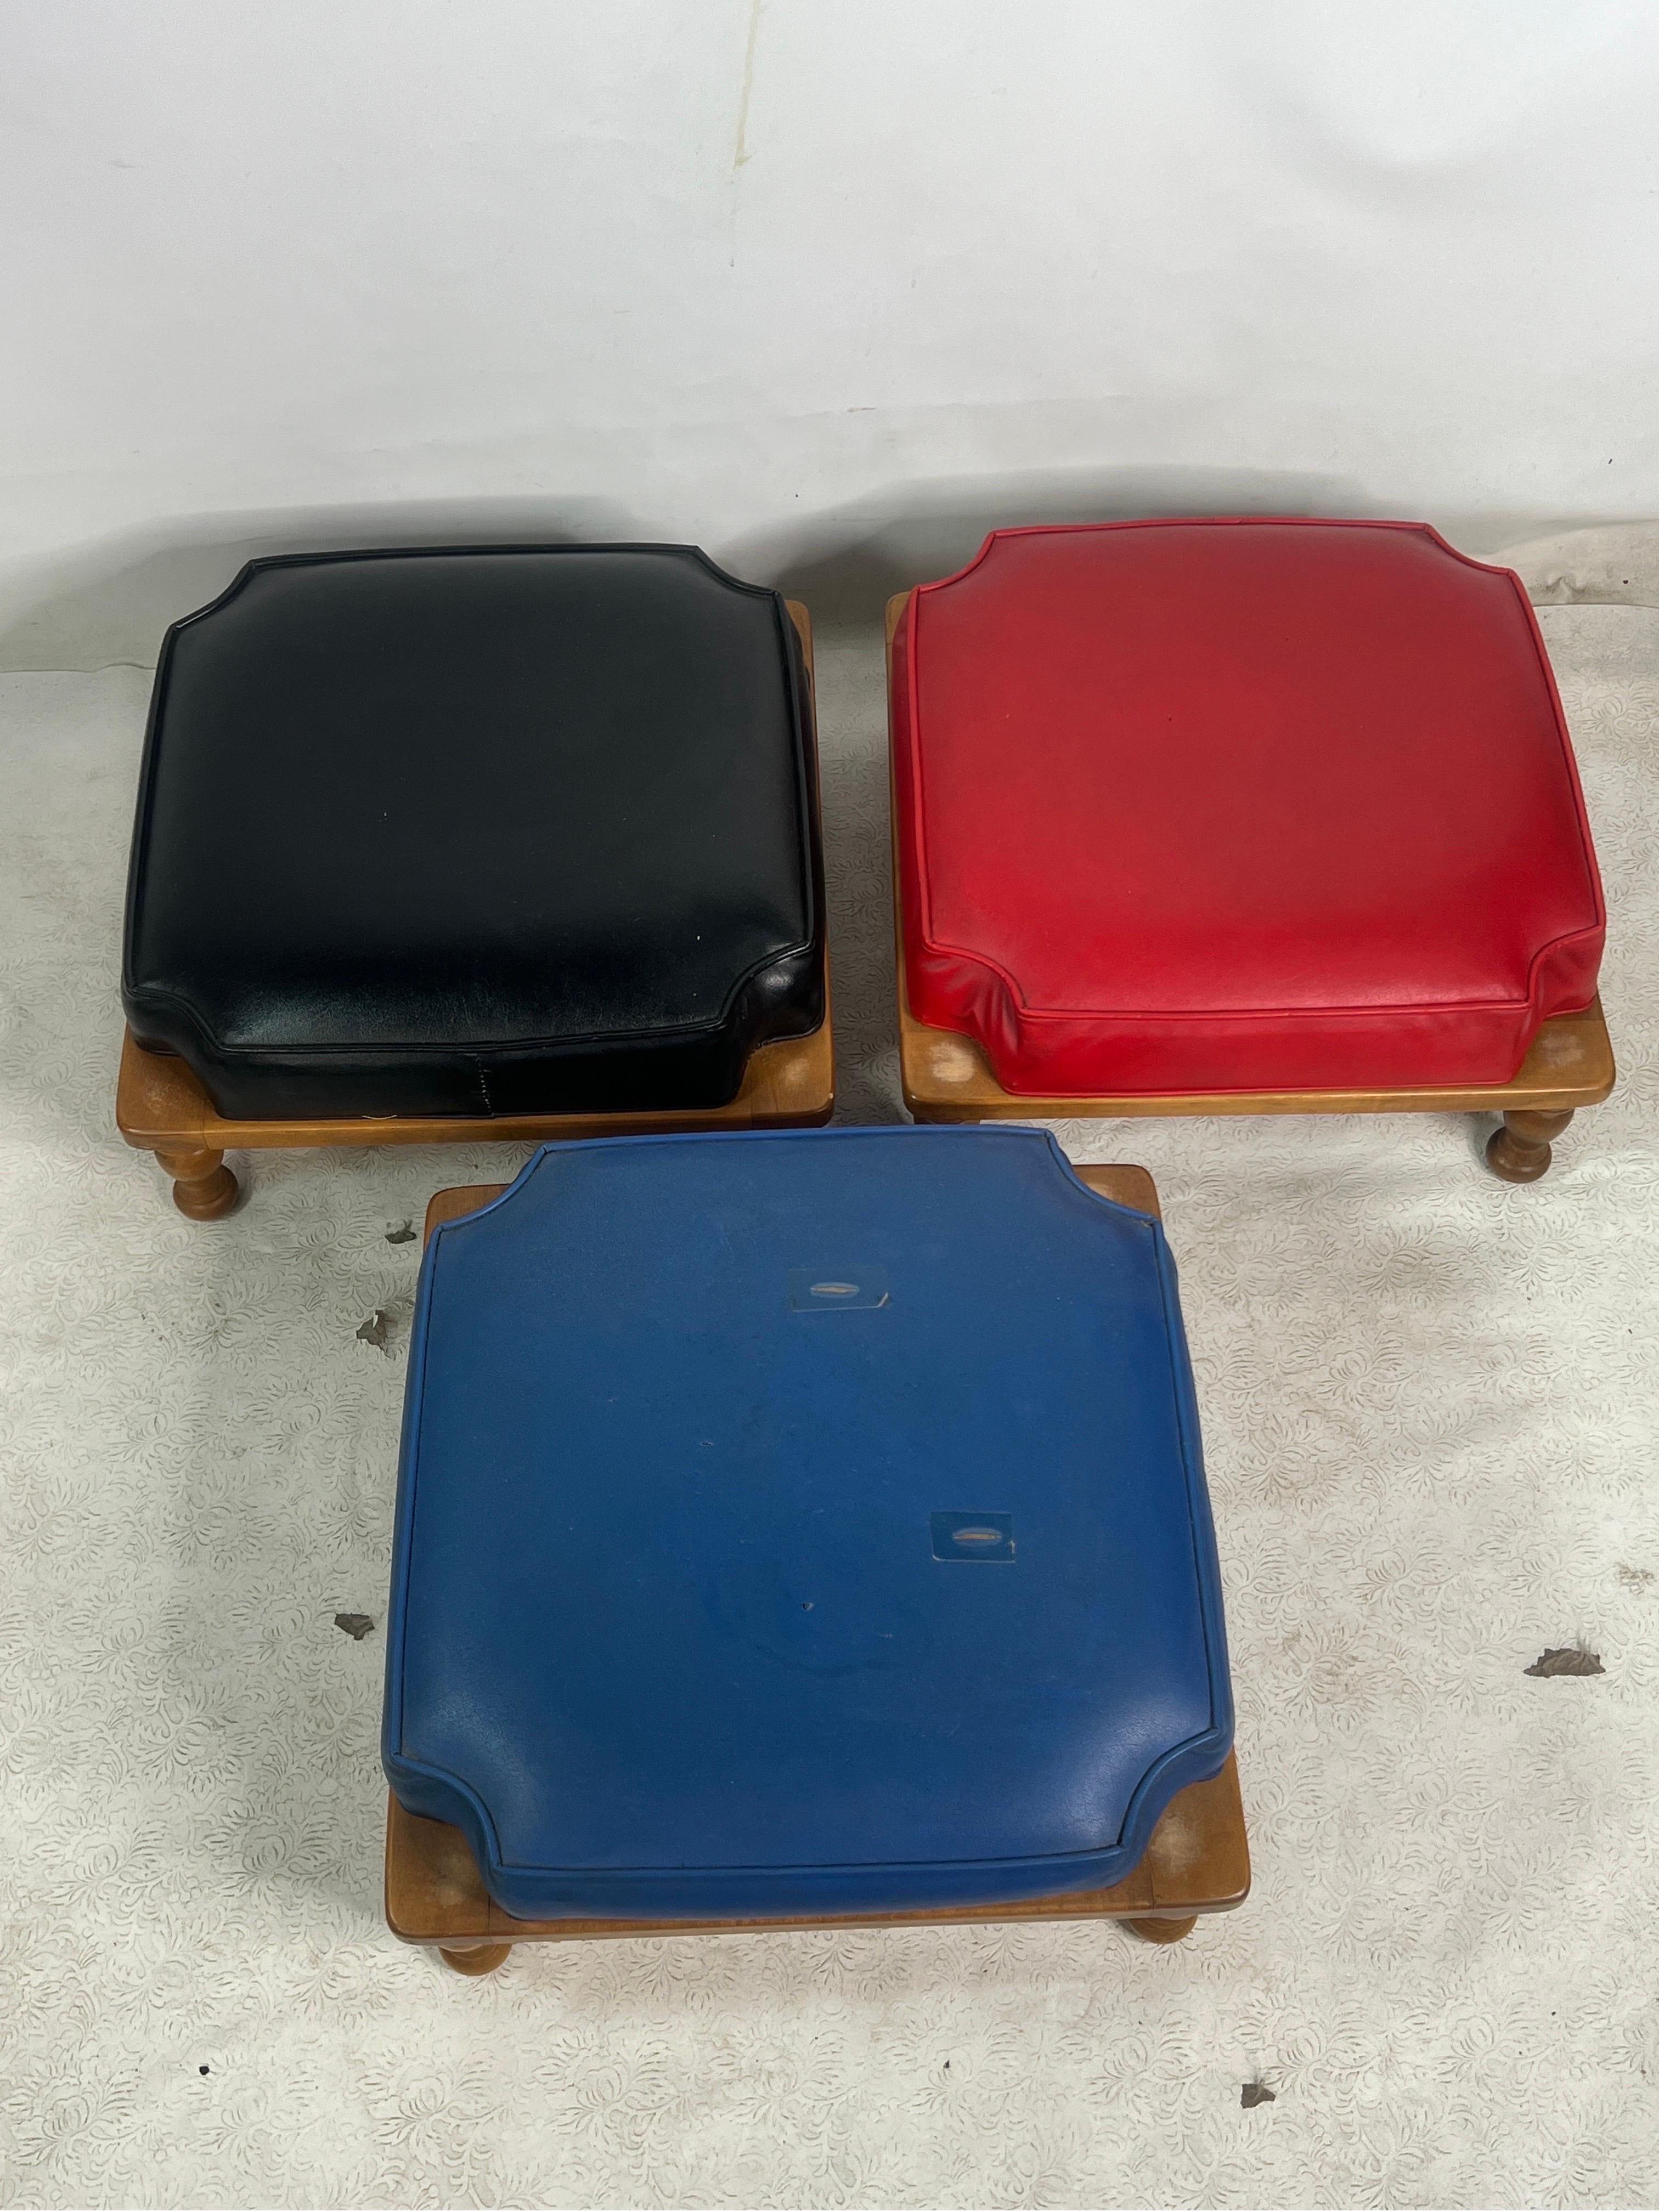 For sale is this nice set of three stacking ottomans made by Baumritter.